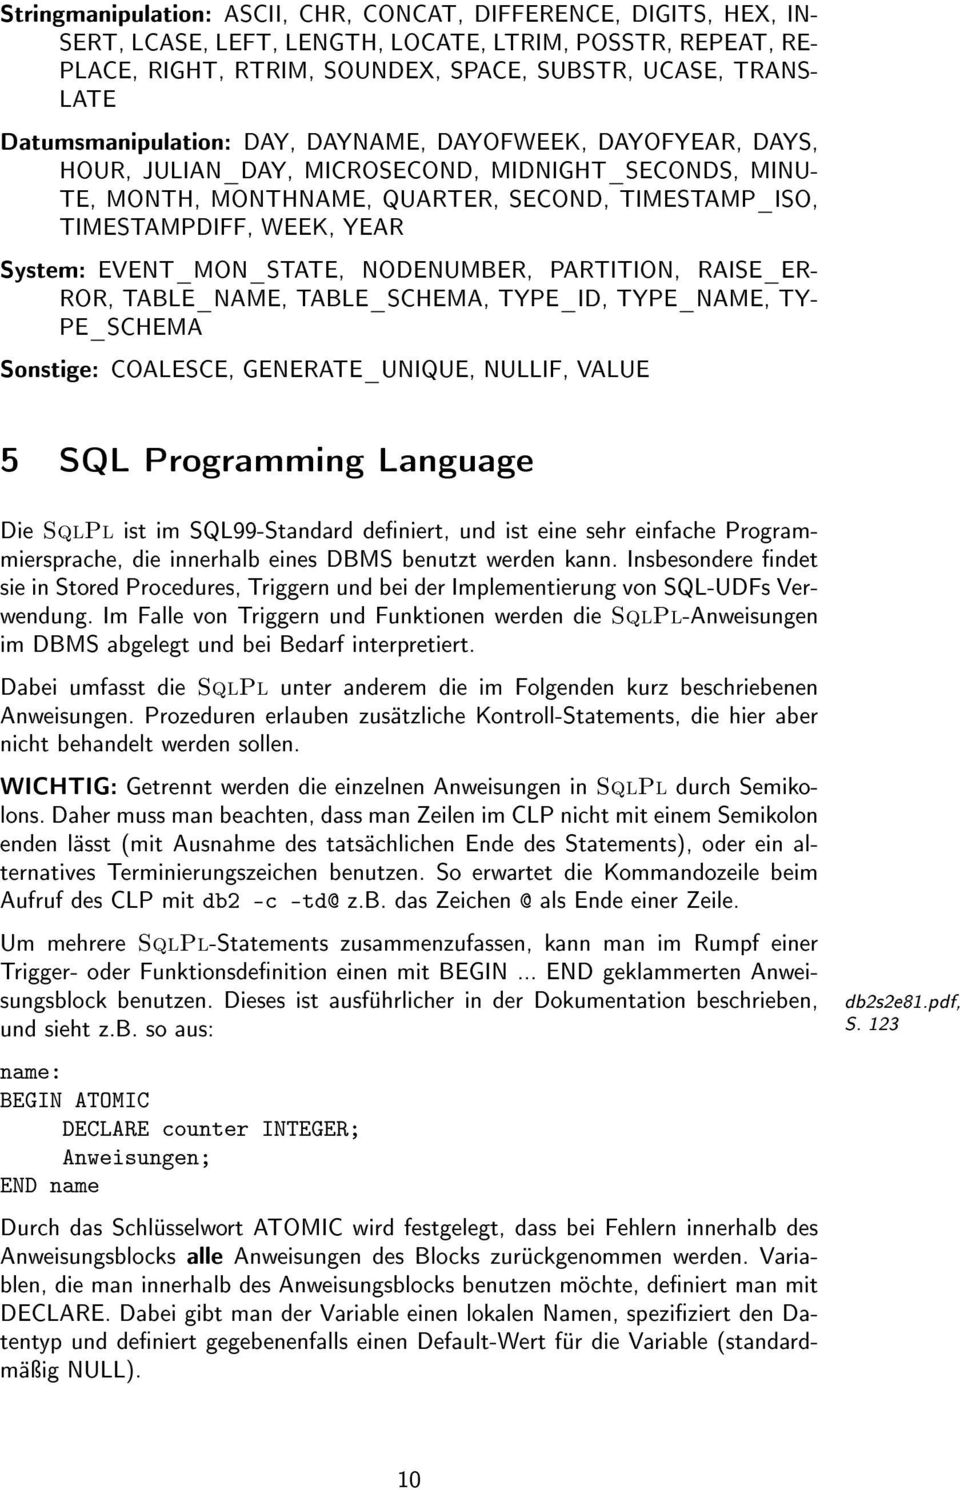 System: EVENT_MON_STATE, NODENUMBER, PARTITION, RAISE_ER- ROR, TABLE_NAME, TABLE_SCHEMA, TYPE_ID, TYPE_NAME, TY- PE_SCHEMA Sonstige: COALESCE, GENERATE_UNIQUE, NULLIF, VALUE 5 SQL Programming